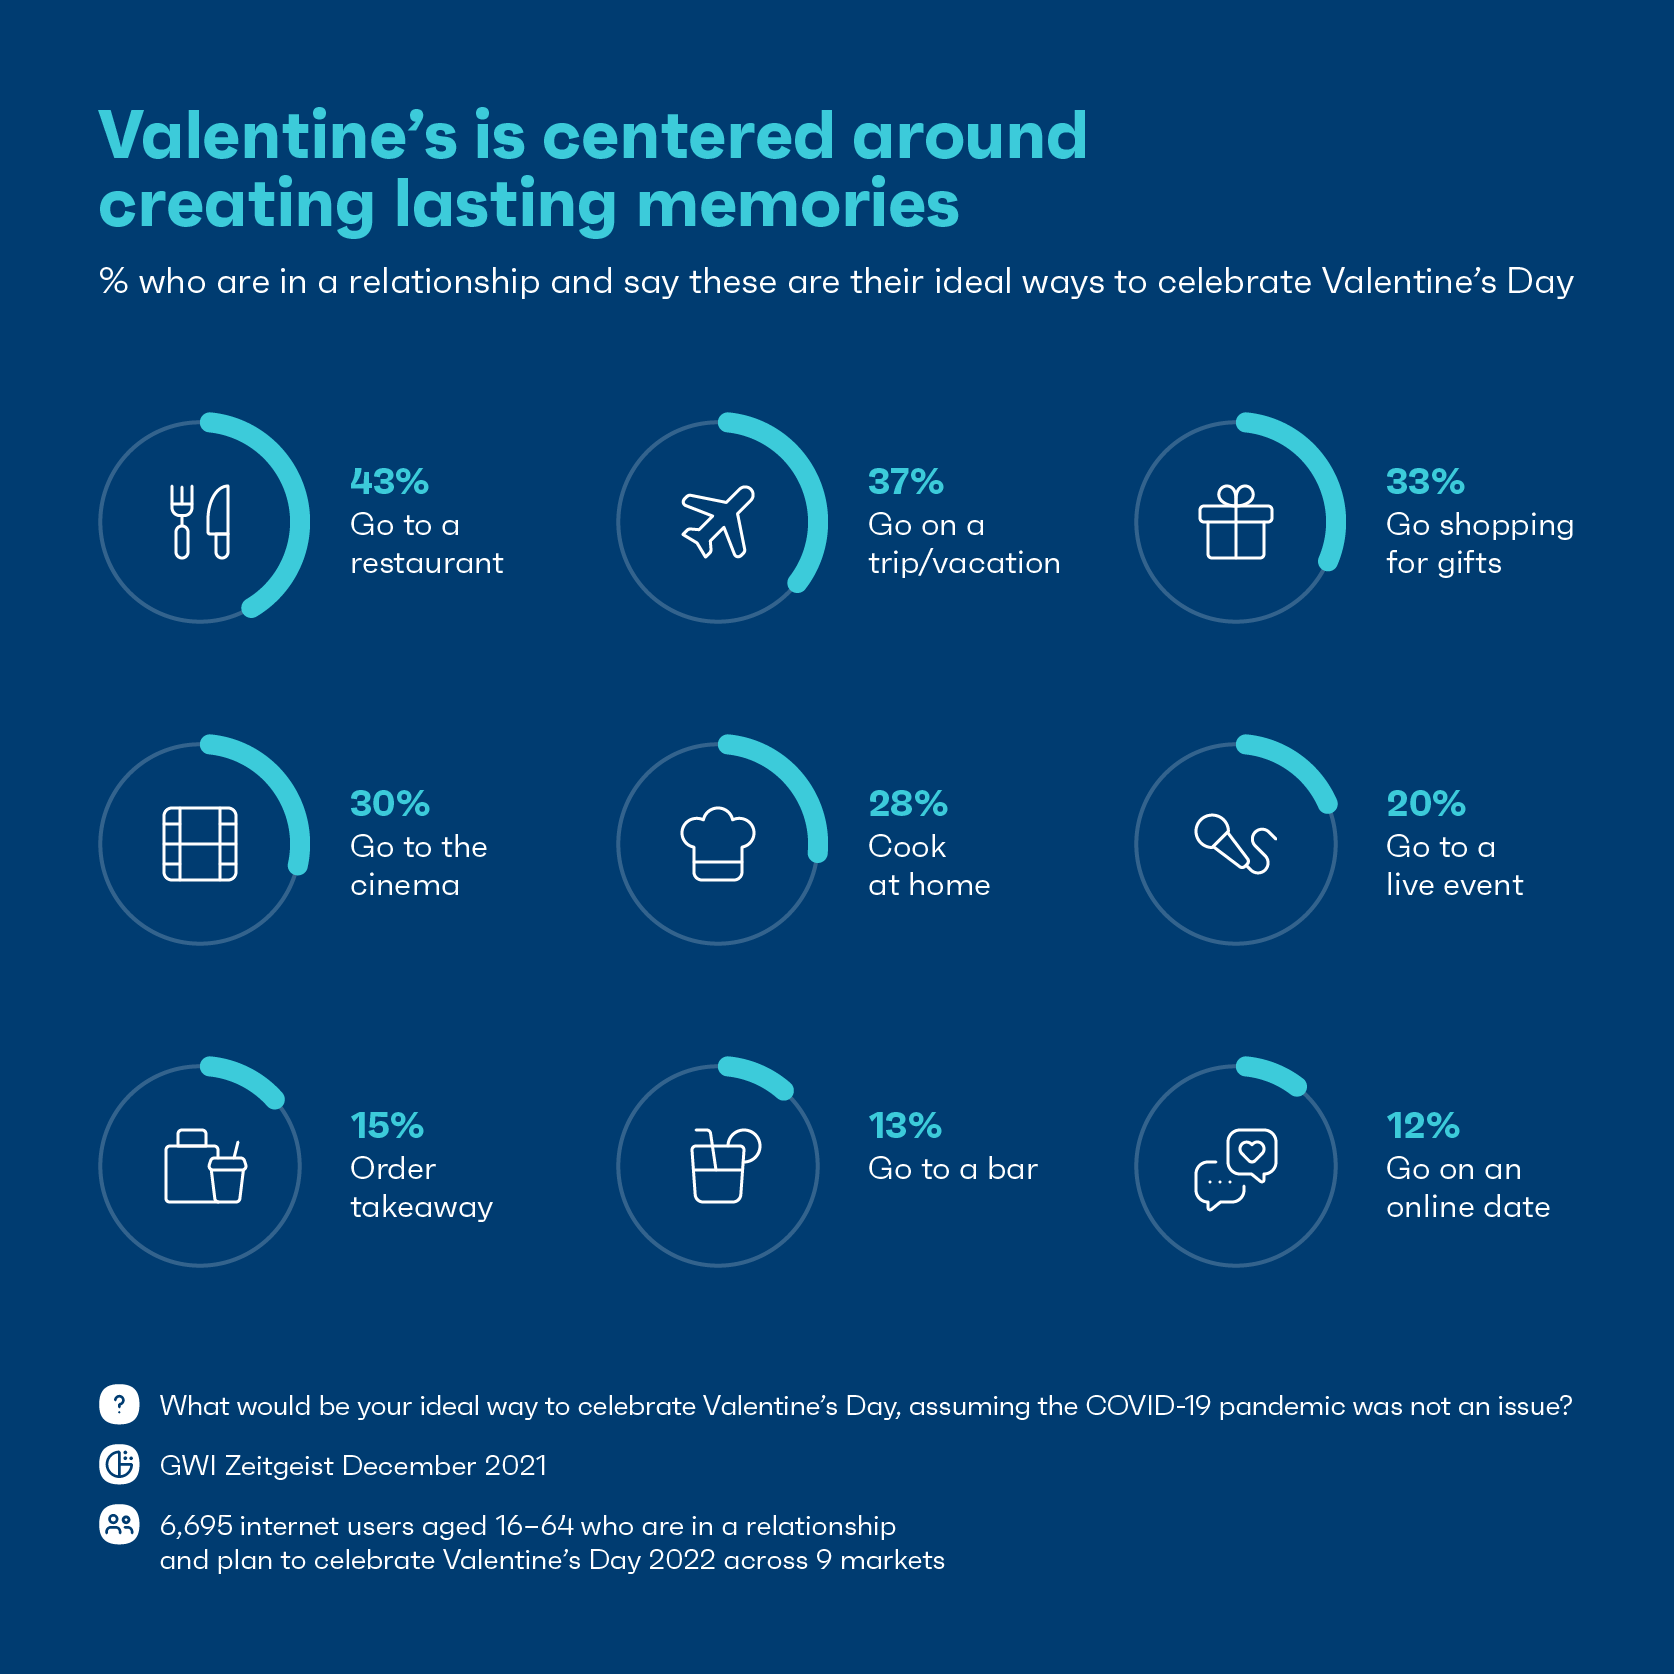 Chart showing how people in a relationship plan to celebrate Valentine's Day